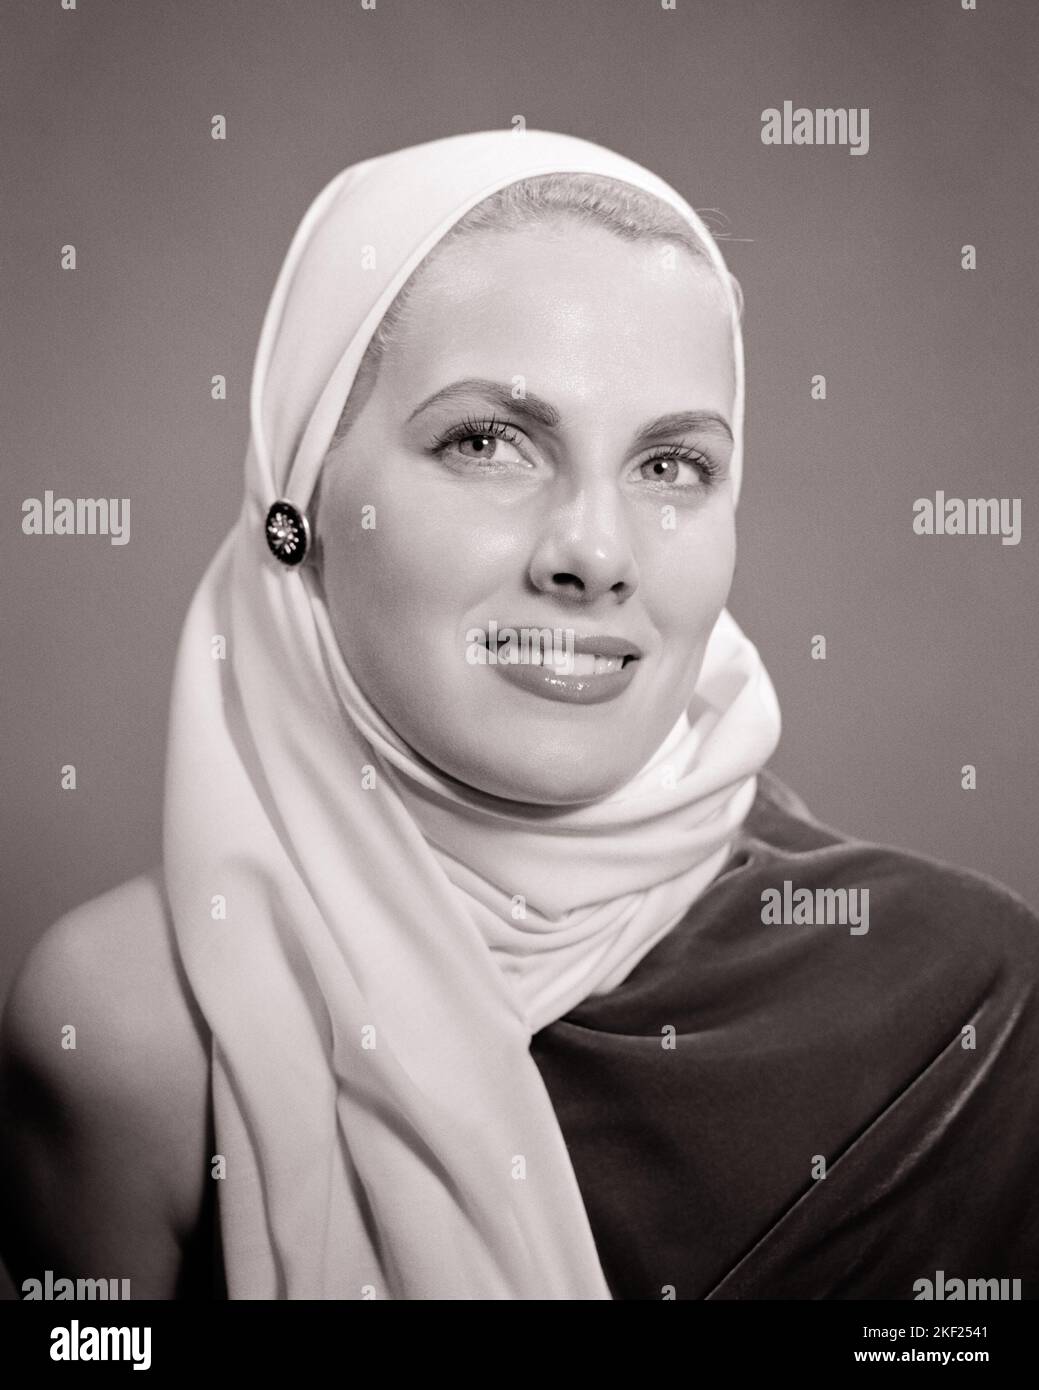 1940s 1950s GLAMOROUS BLONDE WOMAN PORTRAIT WEARING WHITE HEAD SCARF COWL HOOD - g381 HAR001 HARS LIFESTYLE FEMALES STUDIO SHOT HEALTHINESS HOME LIFE COPY SPACE LADIES MAKEUP PERSONS CLOTH PROFESSION CONFIDENCE COVERING EXPRESSIONS B&W OCCUPATION COSMETICS MAKE-UP HEAD AND SHOULDERS CHEERFUL STYLES SOPHISTICATED CAREERS OCCUPATIONS SMILES COWL CONCEPTUAL JOYFUL STYLISH PLEASANT CHIC FASHIONS GLAMOROUS YOUNG ADULT WOMAN BLACK AND WHITE CAUCASIAN ETHNICITY HAR001 HEADSCARF OLD FASHIONED Stock Photo